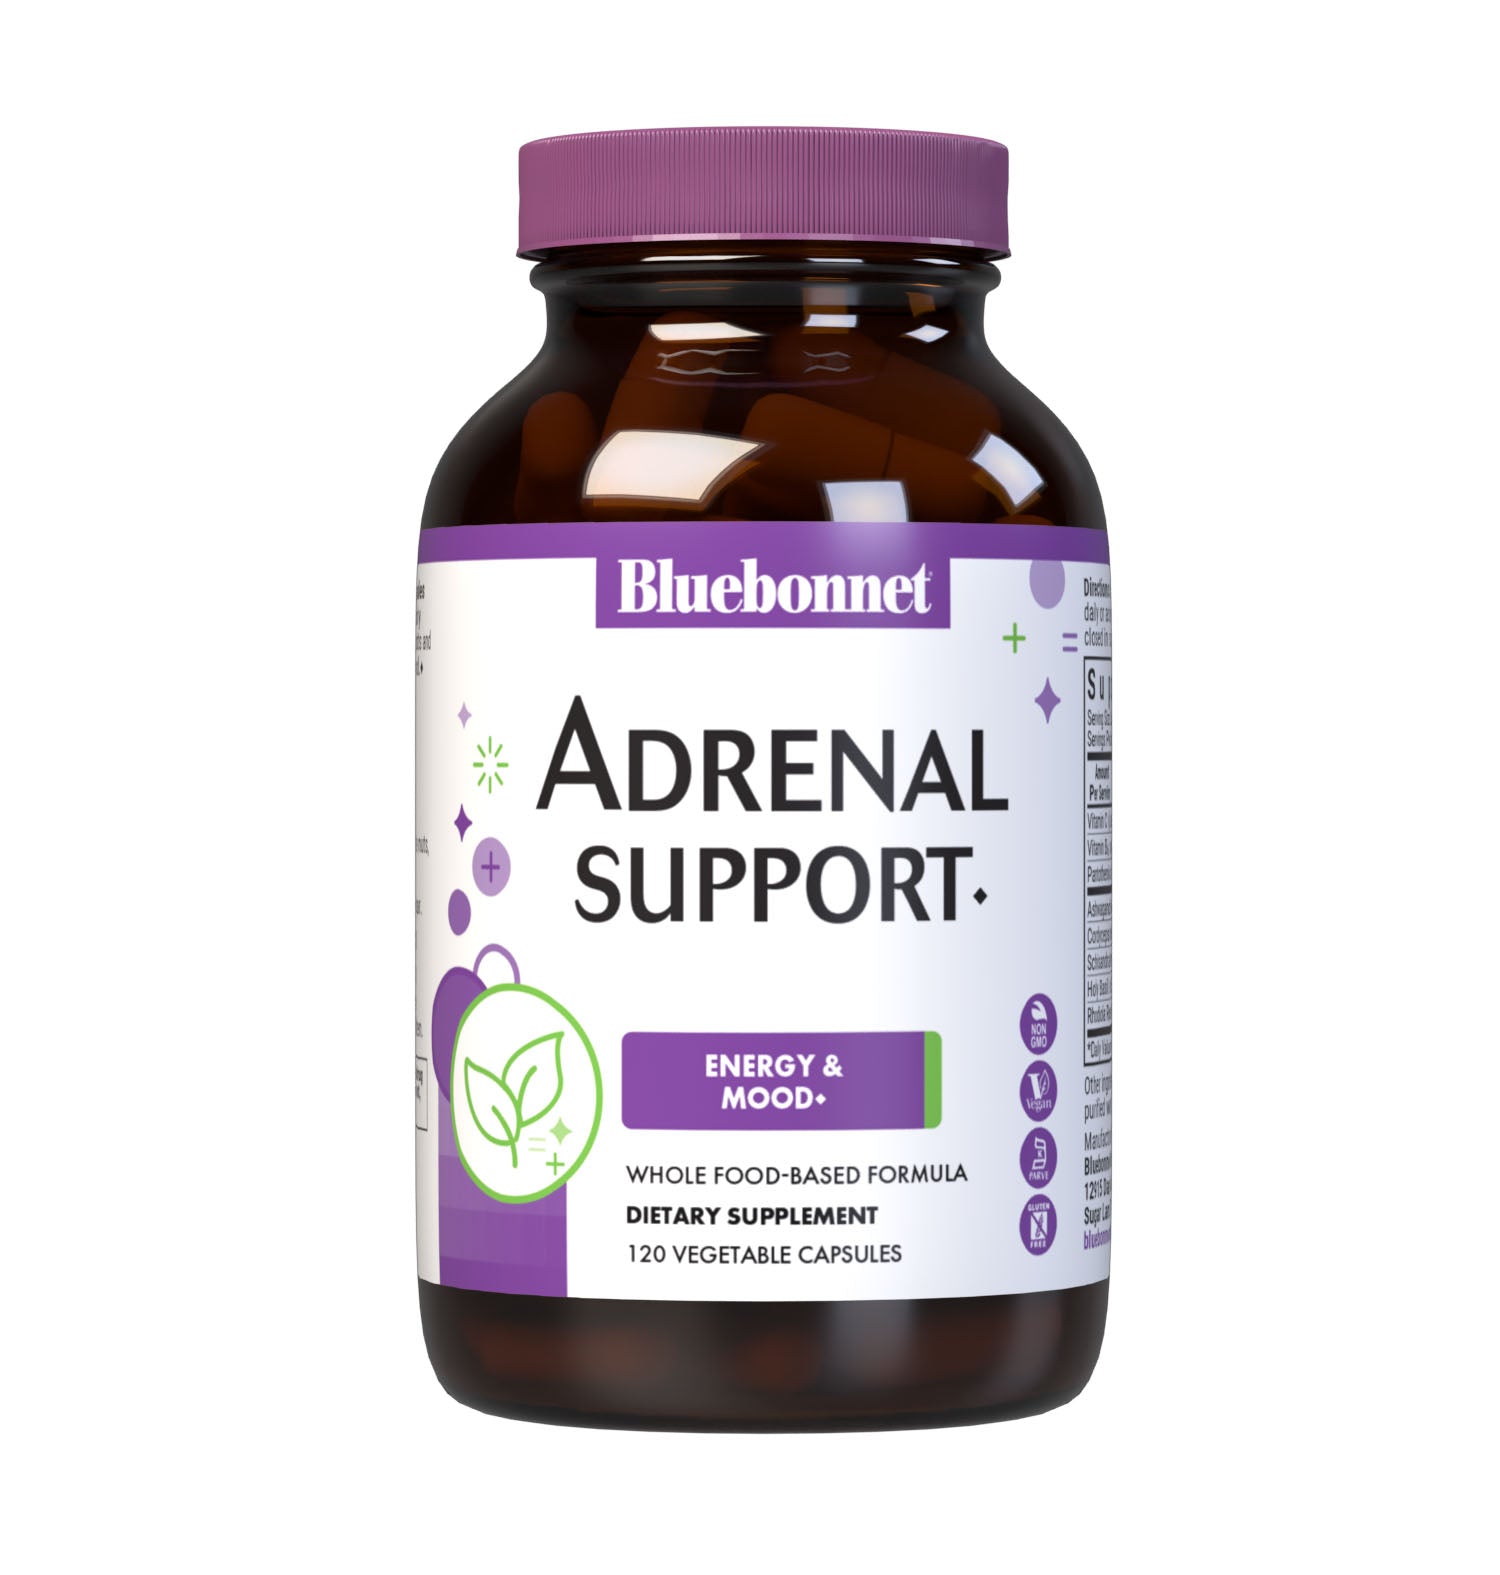 Bluebonnet’s Targeted Choice Adrenal Support 120 Vegetable Capsules are specially formulated with a unique blend of sustainably harvested or wildcrafted herbal extracts that help promote a healthy response to stress while also maintaining healthy energy levels. Essential nutrients important for the normal production of adrenal hormones were also incorporated to optimize adrenal gland function critical to helping the body adapt to stress in a balanced way. #size_120 count